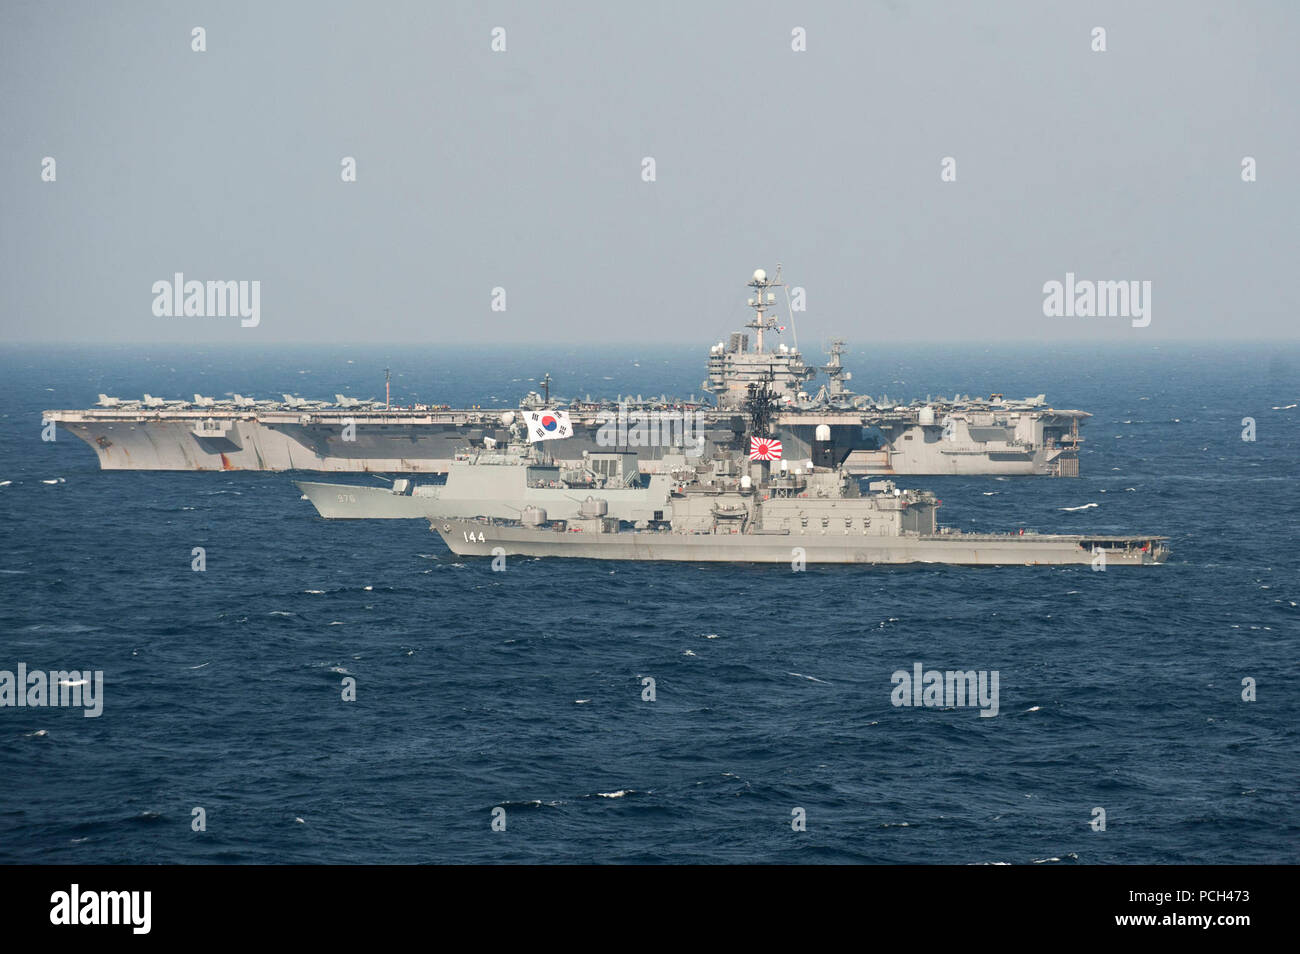 EAST CHINA SEA (June 21, 2012) The Japan Maritime Self Defense Force Shirane-class destroyer JS Kurama (DDH-144), the Republic of Korea navy Chungmugong Yi Sun-sin class destroyer Munmu the Great (DDH-976), and the Nimitz-class Navy aircraft carrier USS George Washington (CVN 73) are in formation during a trilateral exercise. The exercise is designed to improve interoperability and readiness among the three Navies. Stock Photo